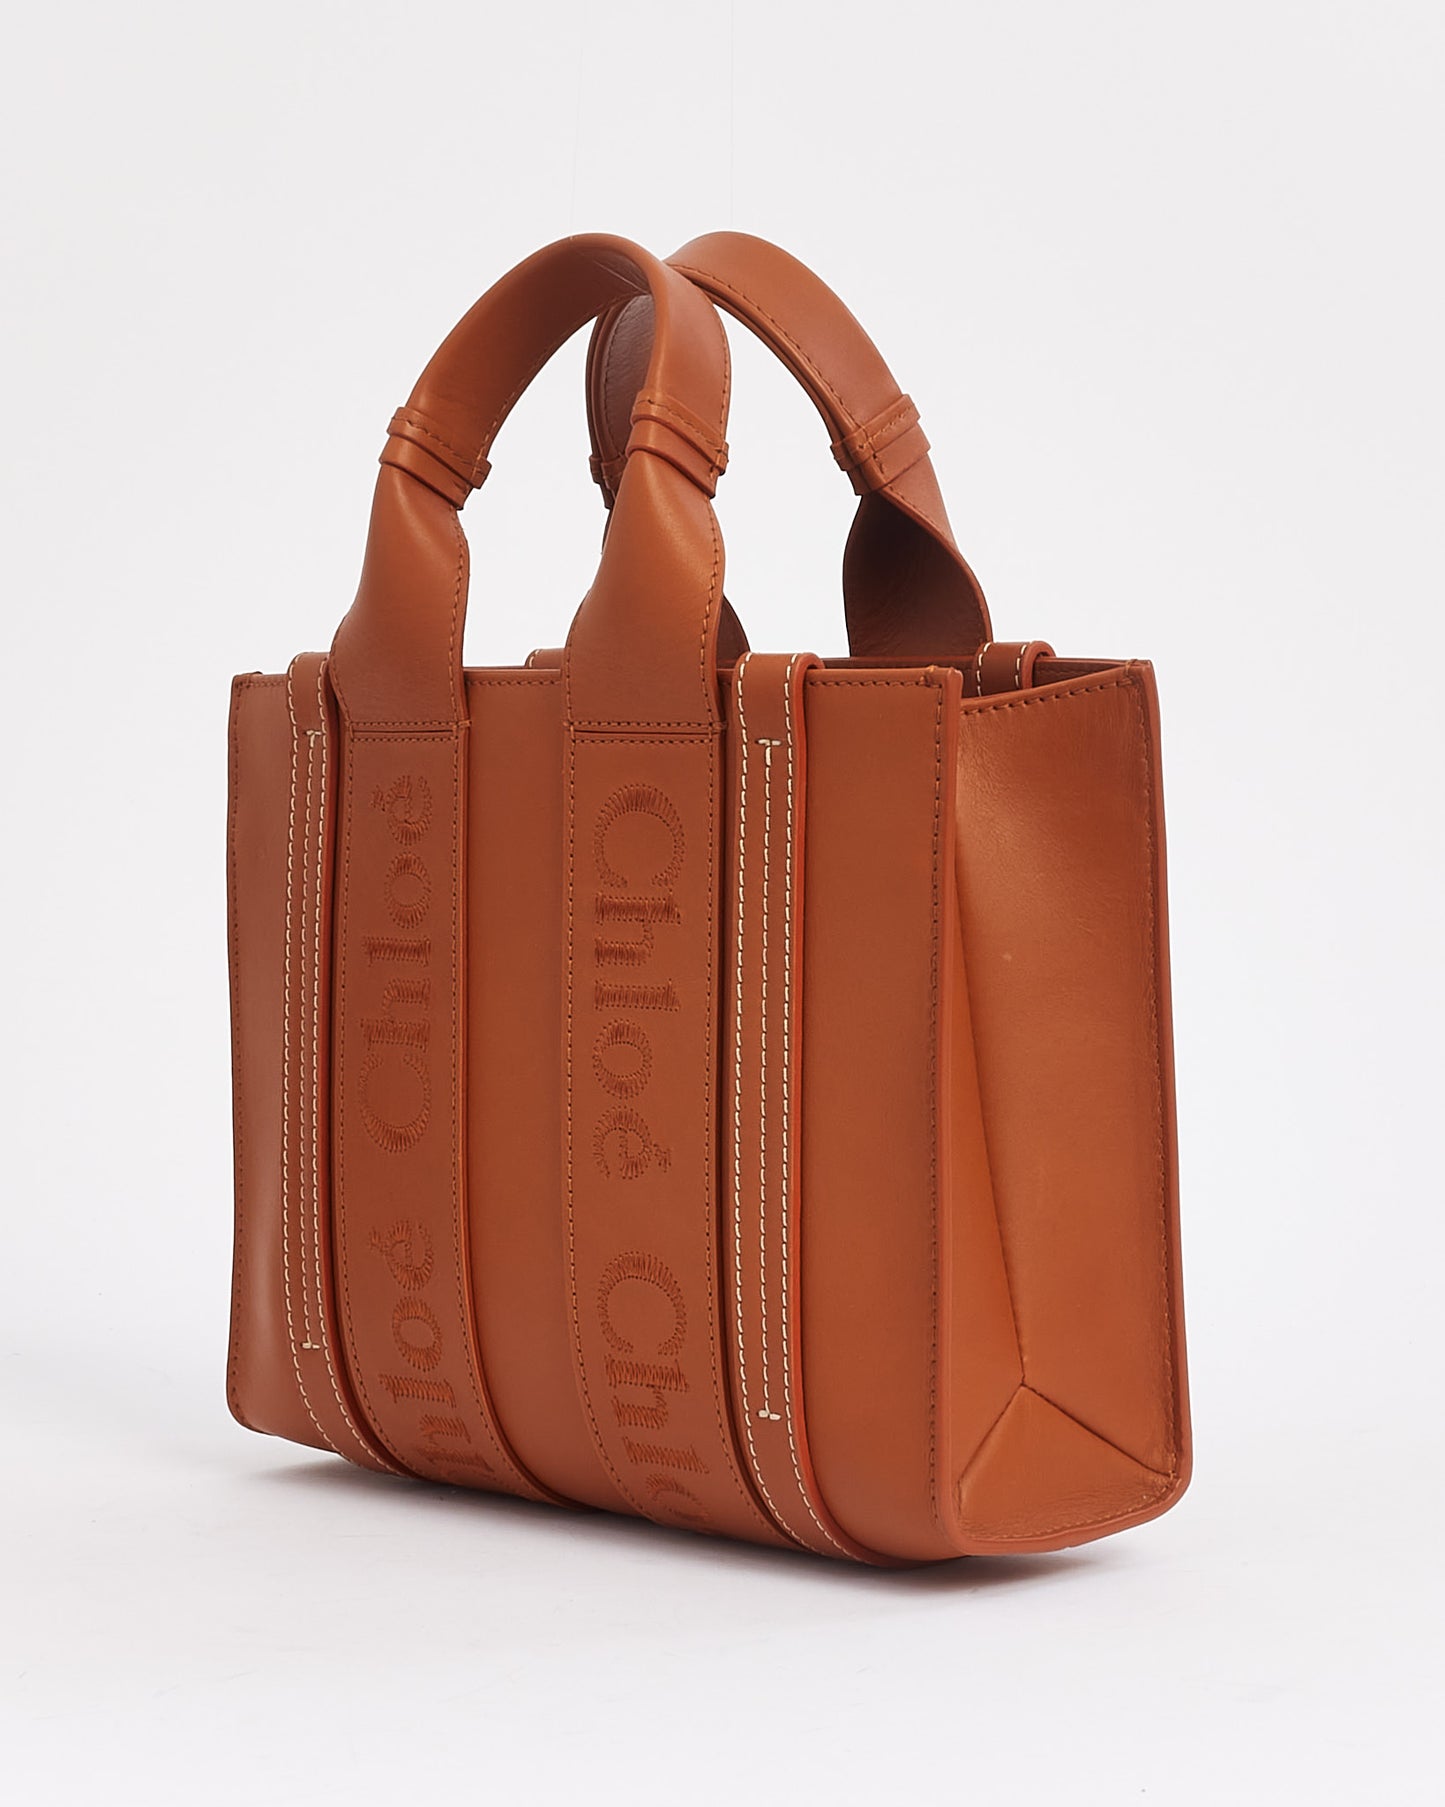 Chloé Tan Leather Small Woody Tote Bag with Strap